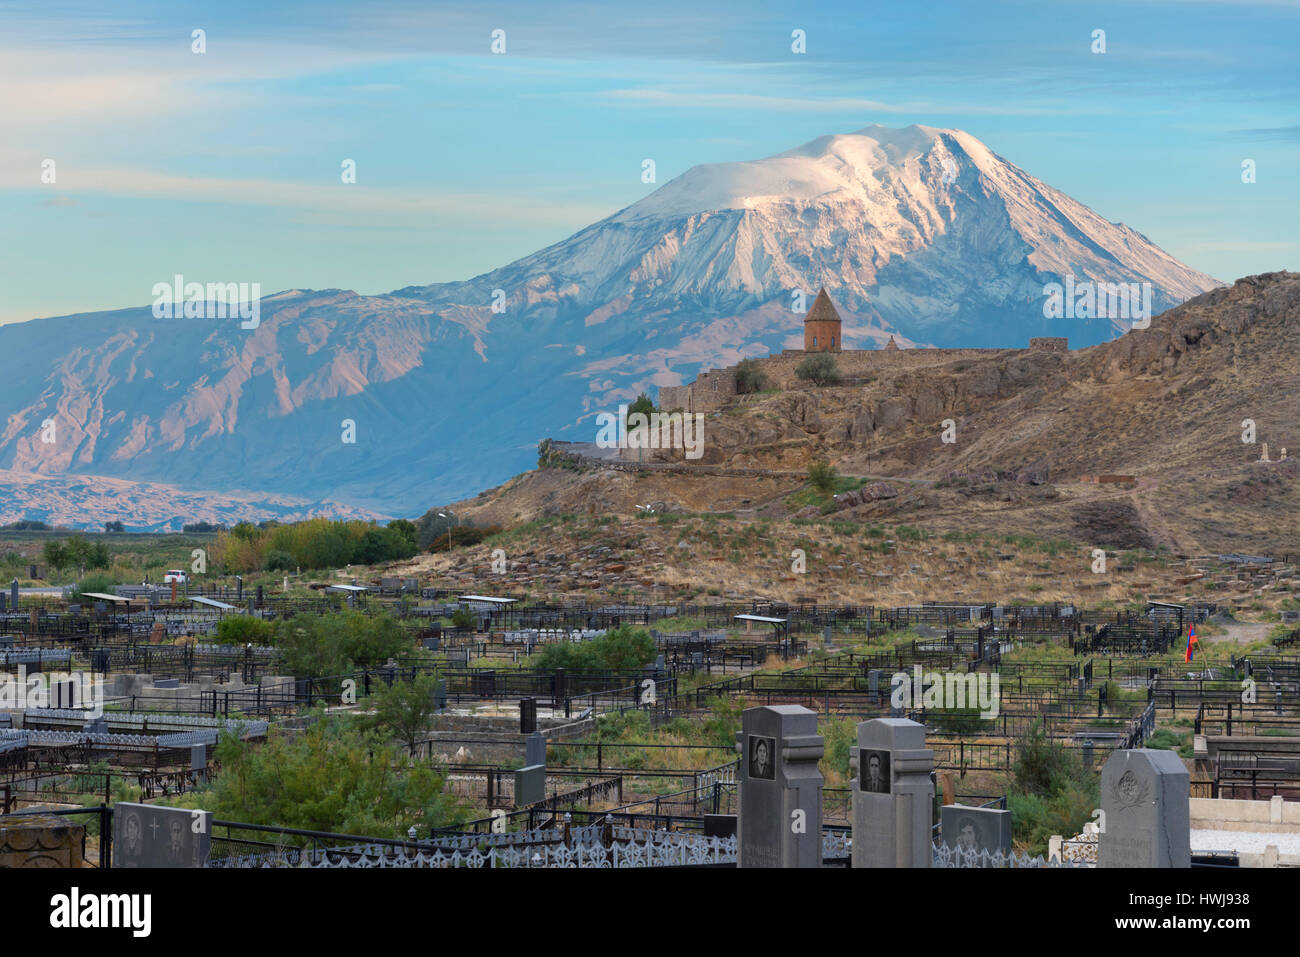 Khor Virap village cemetery with the Monastery and mount Ararat behind, Ararat Province, Armenia, Caucasus, Middle East, Asia Stock Photo